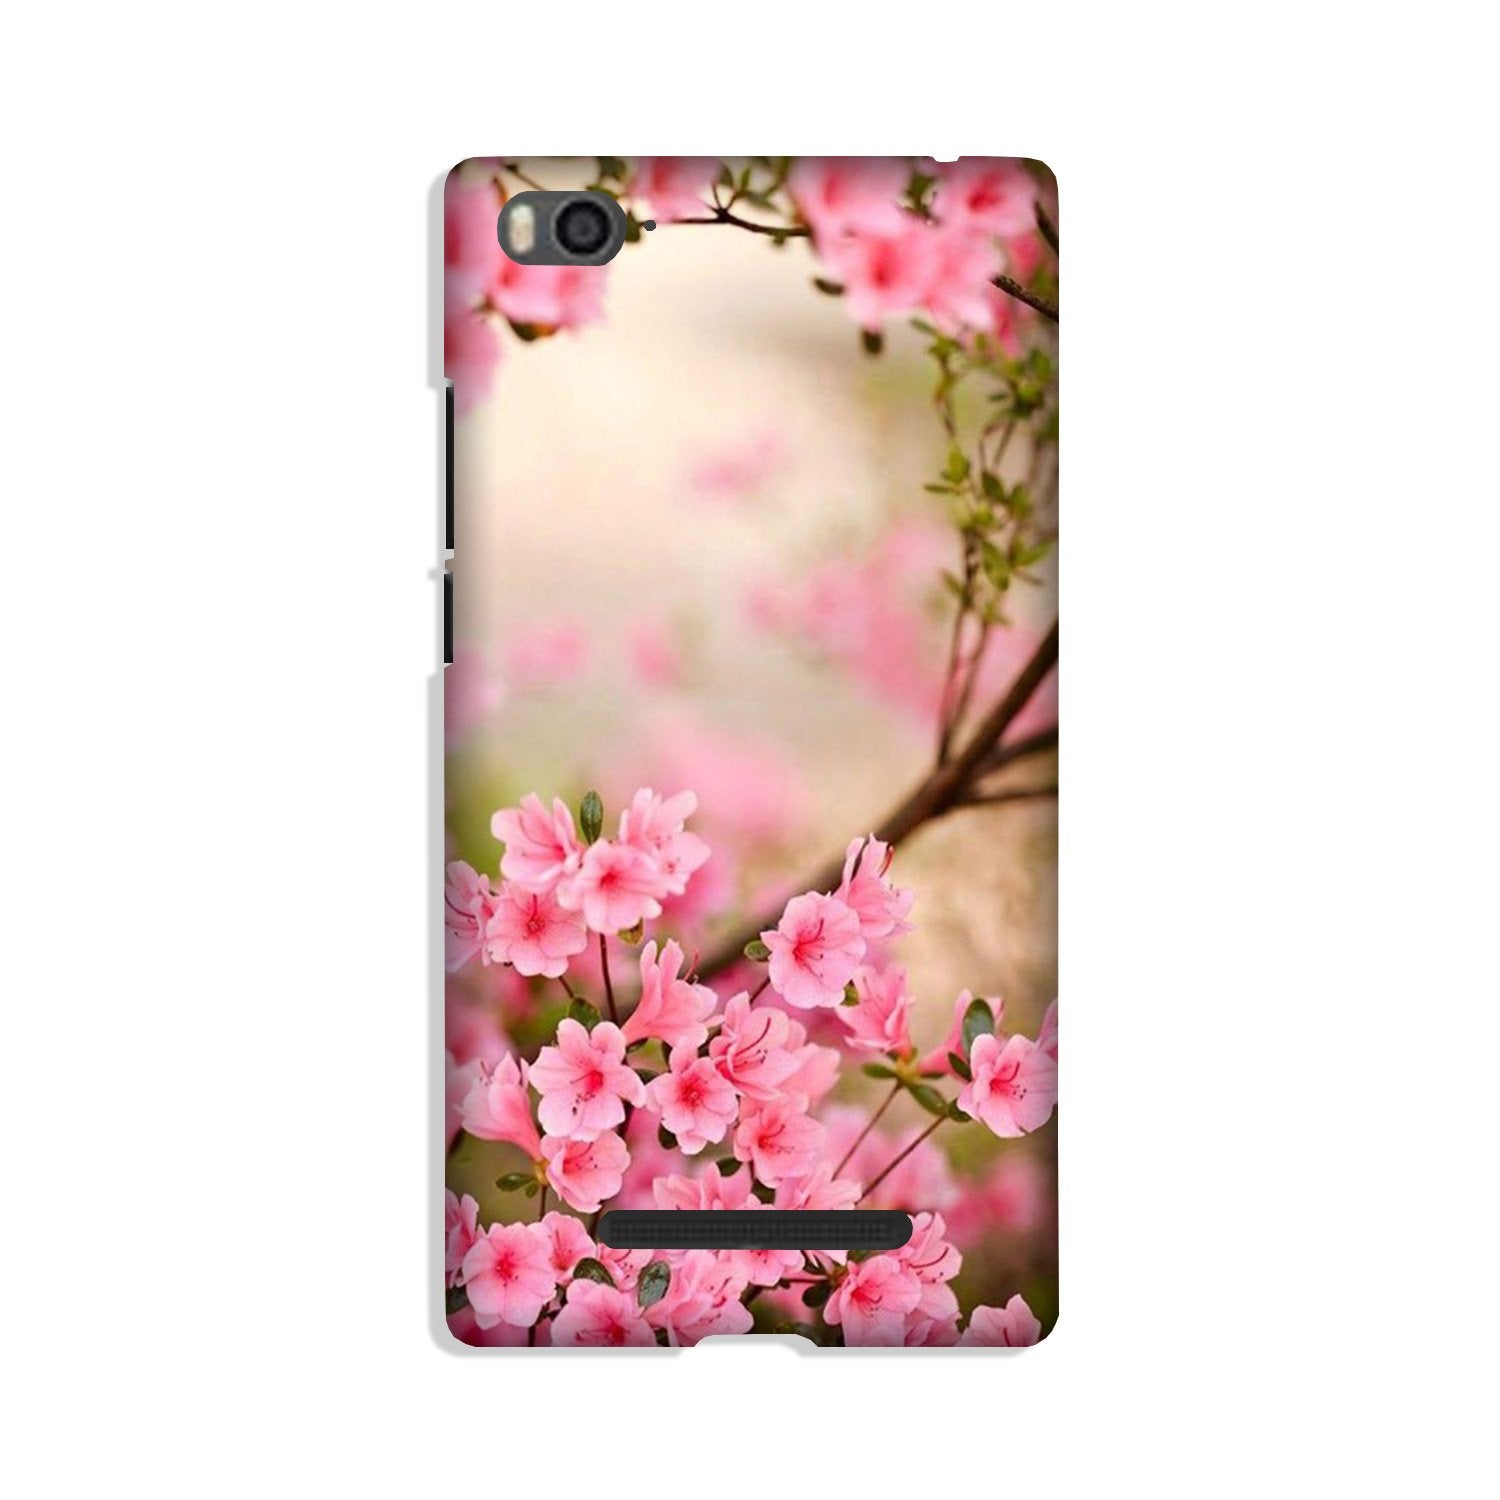 Pink flowers Case for Redmi 4A